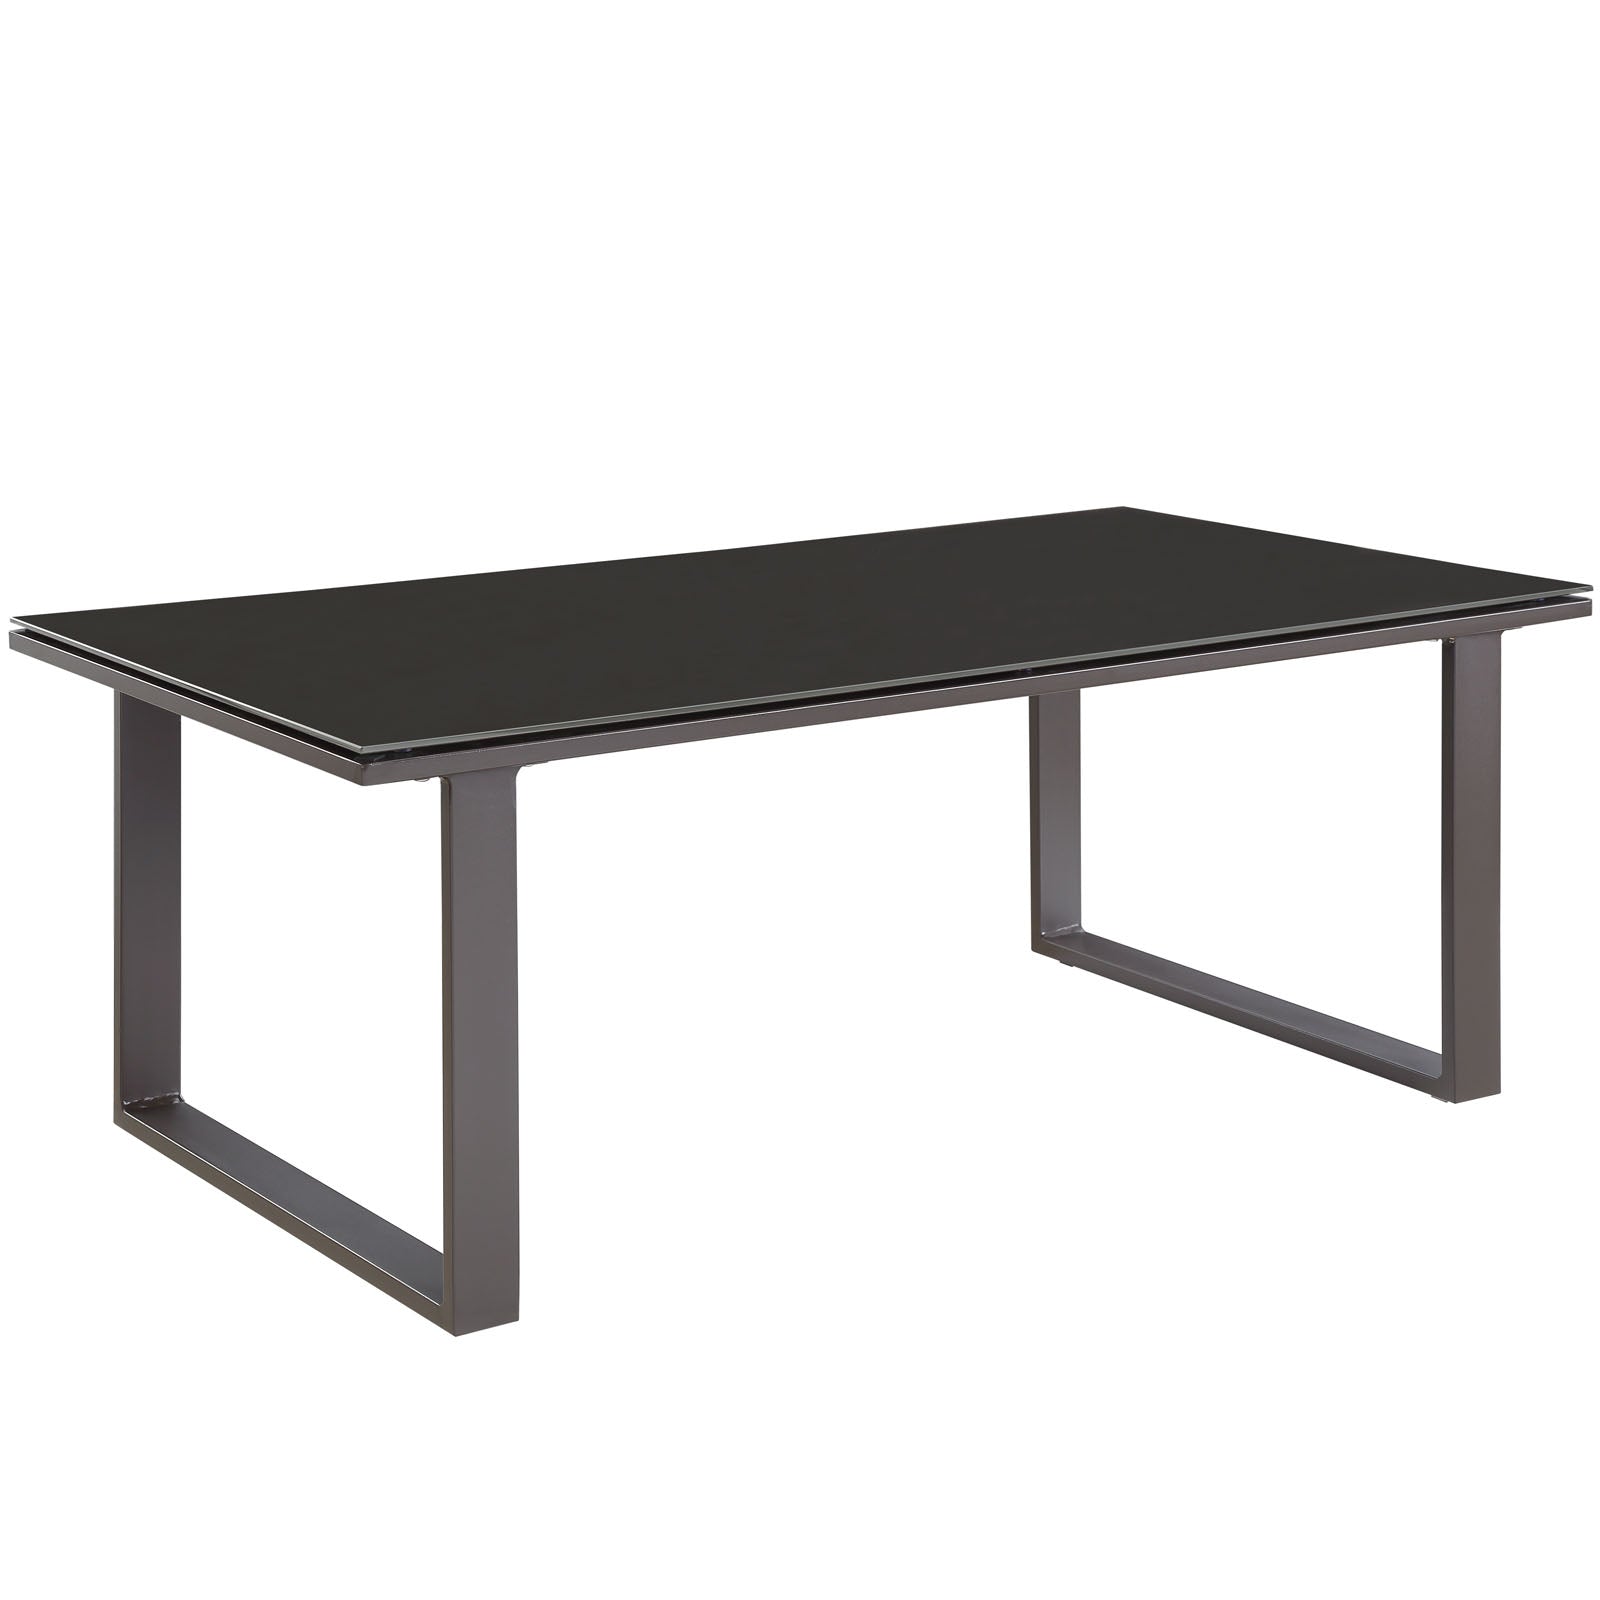 Fortuna Outdoor Patio Coffee Table